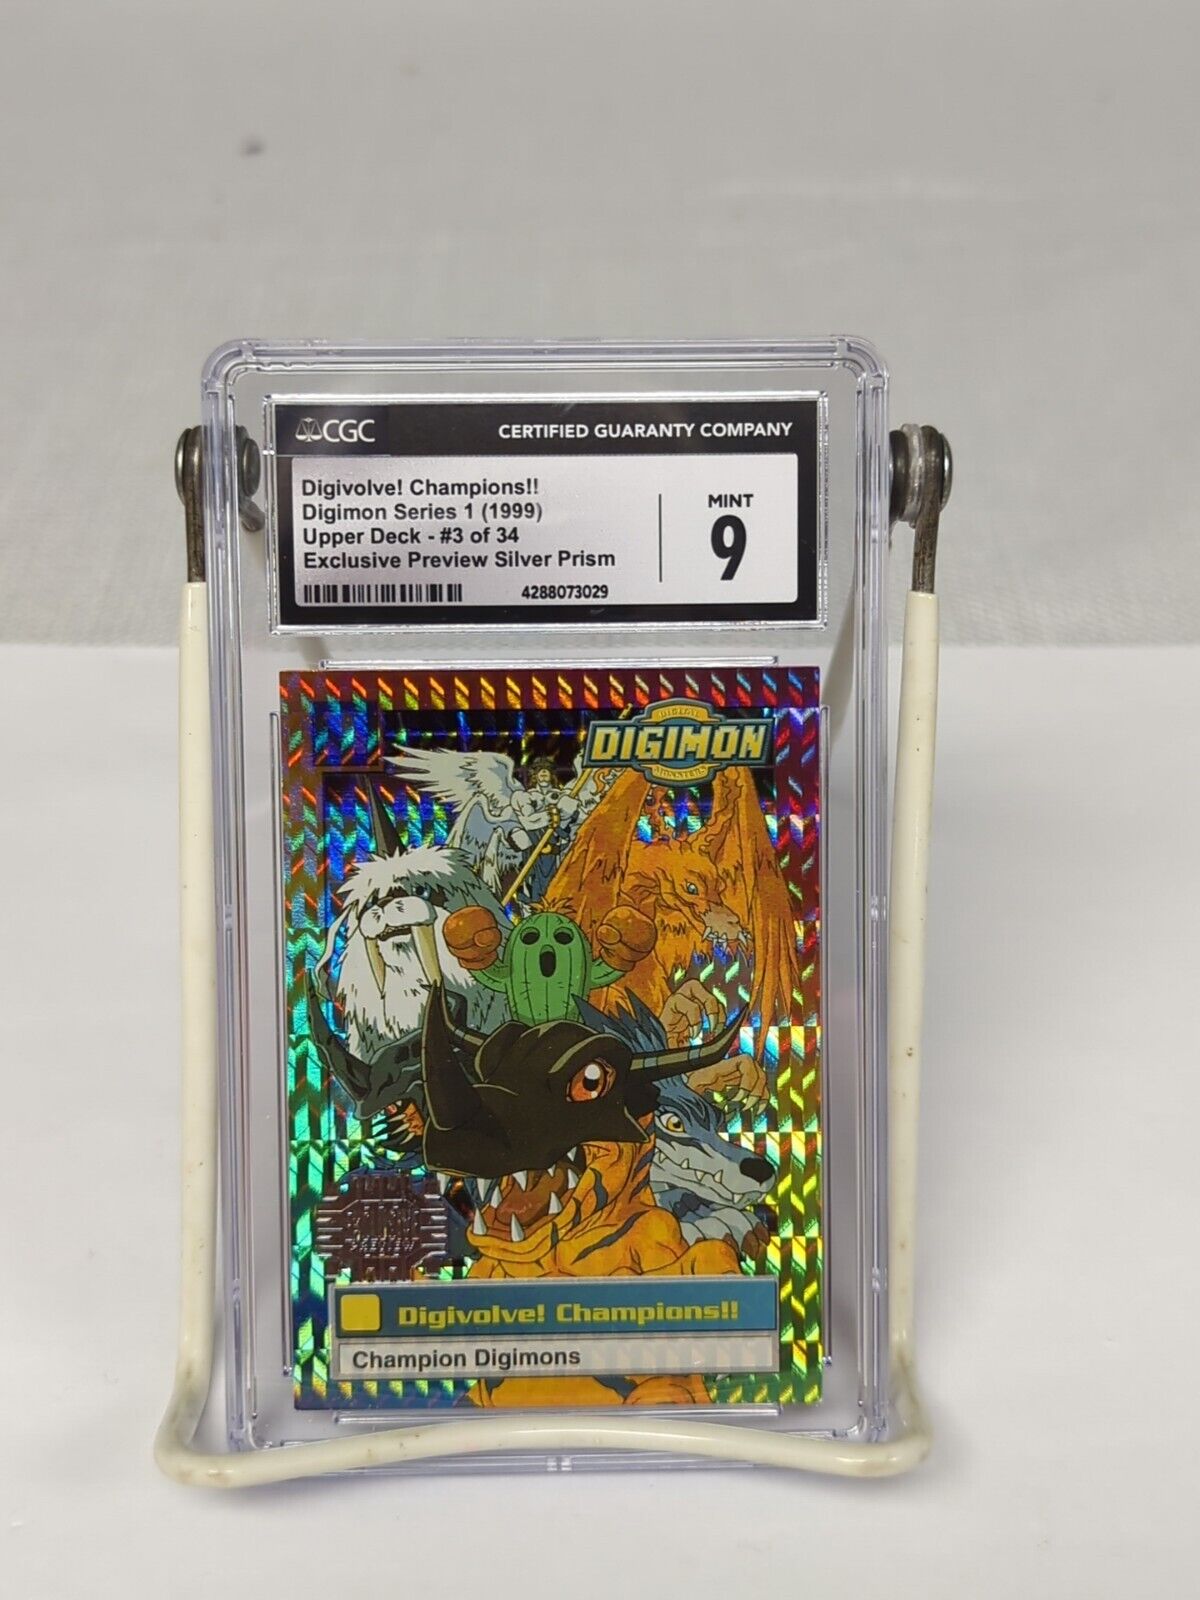 1999 Upper Deck Digimon Digivolve Champions Silver Prism Exclusive Preview CGC 9